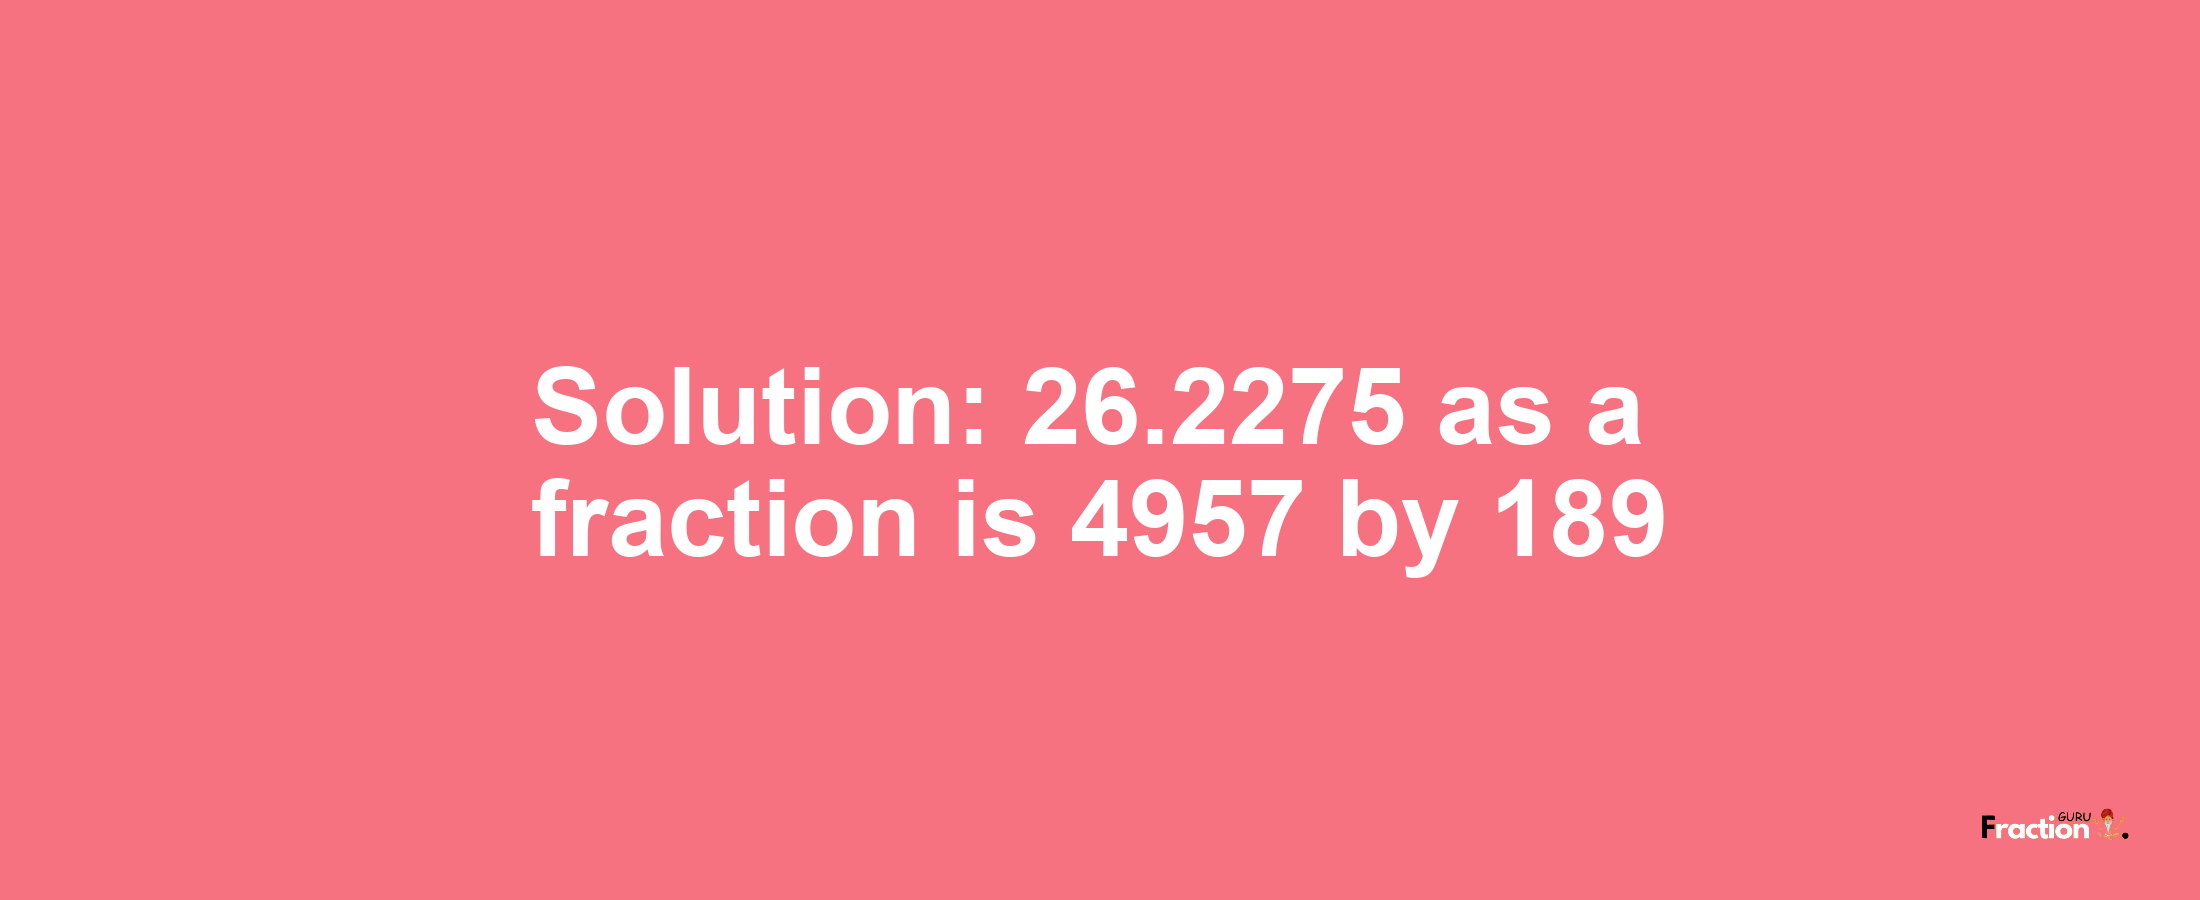 Solution:26.2275 as a fraction is 4957/189